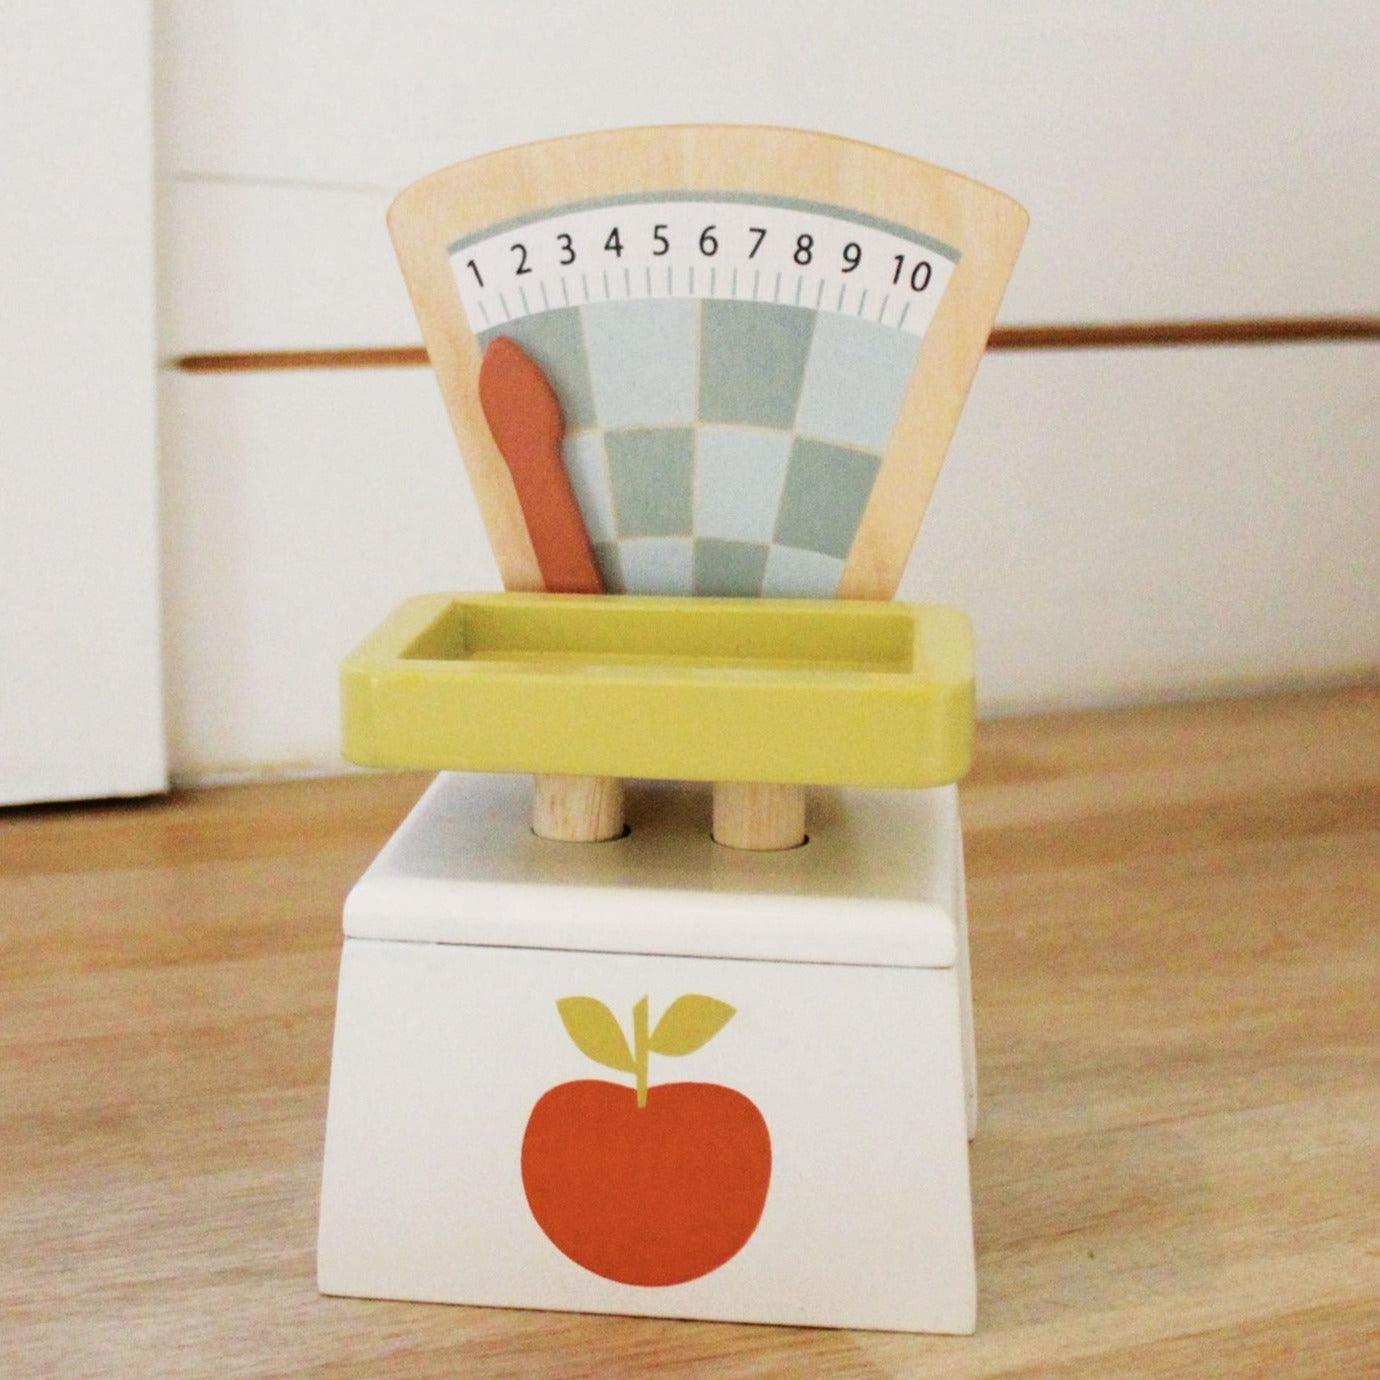 Tender Leaf Toys: Market Scales wooden scale